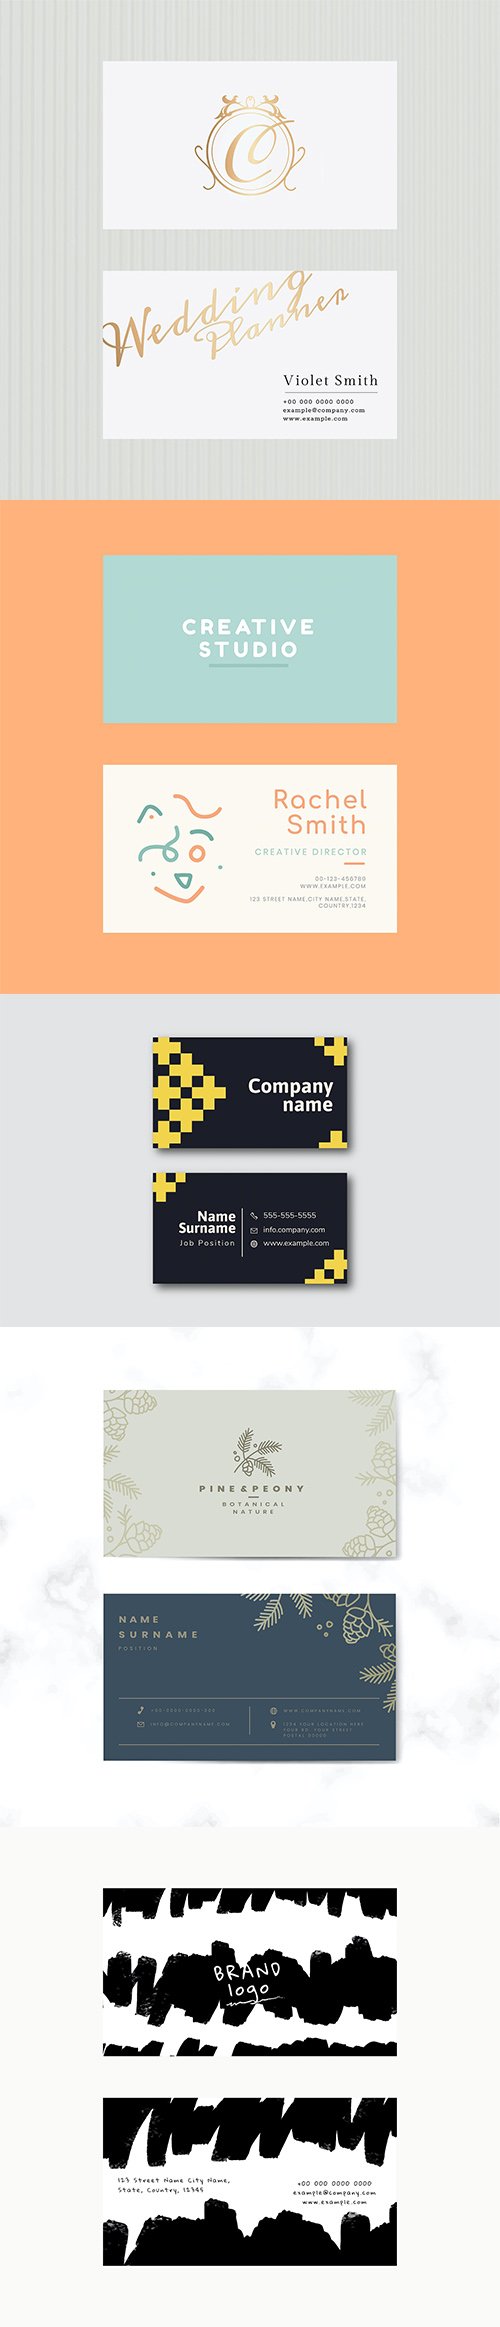 Set of business card template vol2